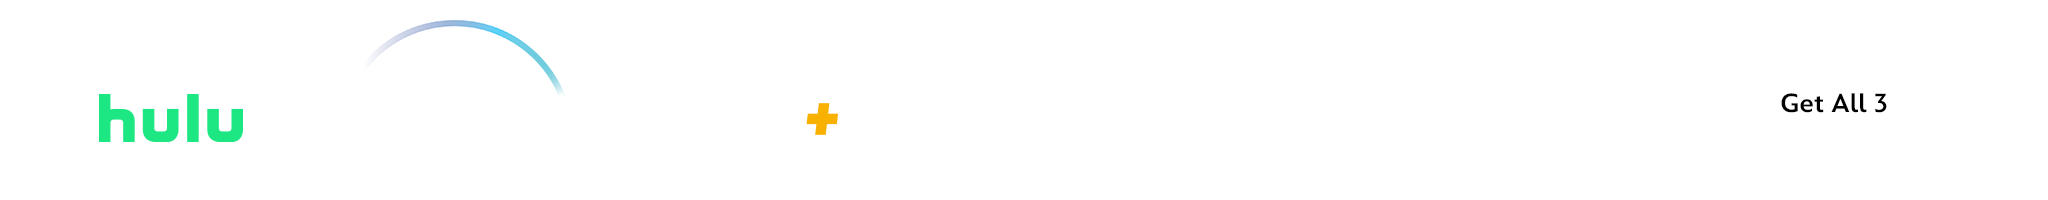 Disney+ | Hulu | ESPN+ | Discover the world's best stories across Disney+, Hulu, and ESPN+ with the Disney bundle. | Get all 3.